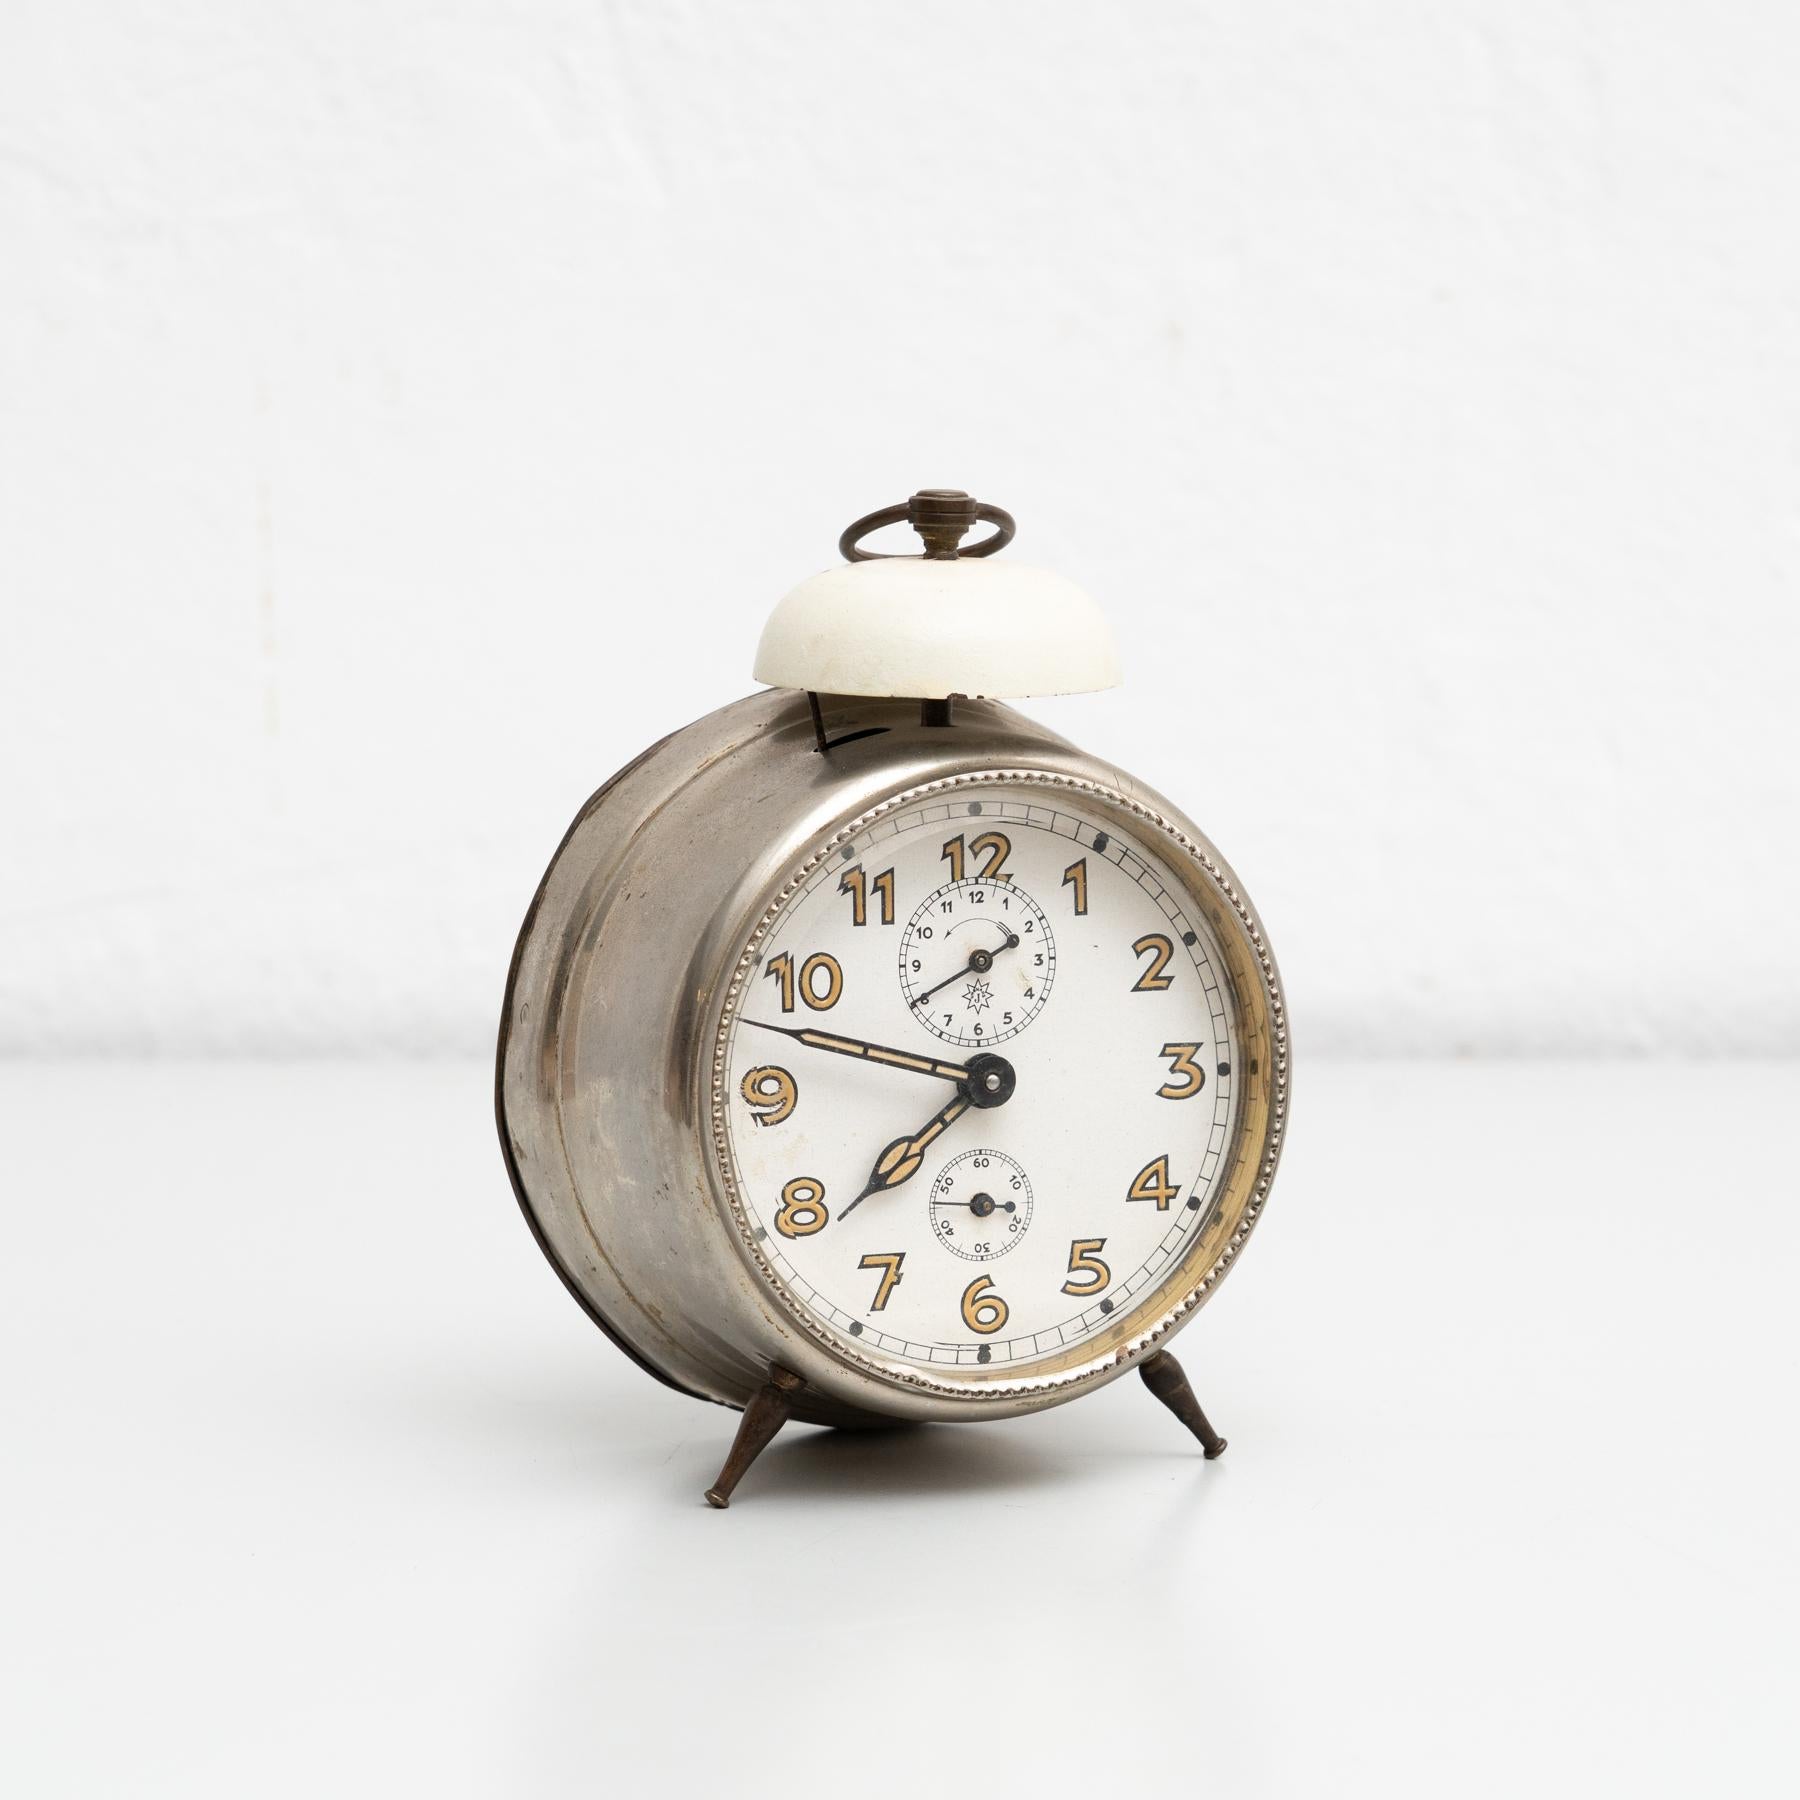 Vintage Spanish traditional alarm clock.

Manufactured by unknown company in Spain circa 1960.

In original condition with minor wear consistent of age and use, preserving a beautiful patina.

Materials:
Metal.